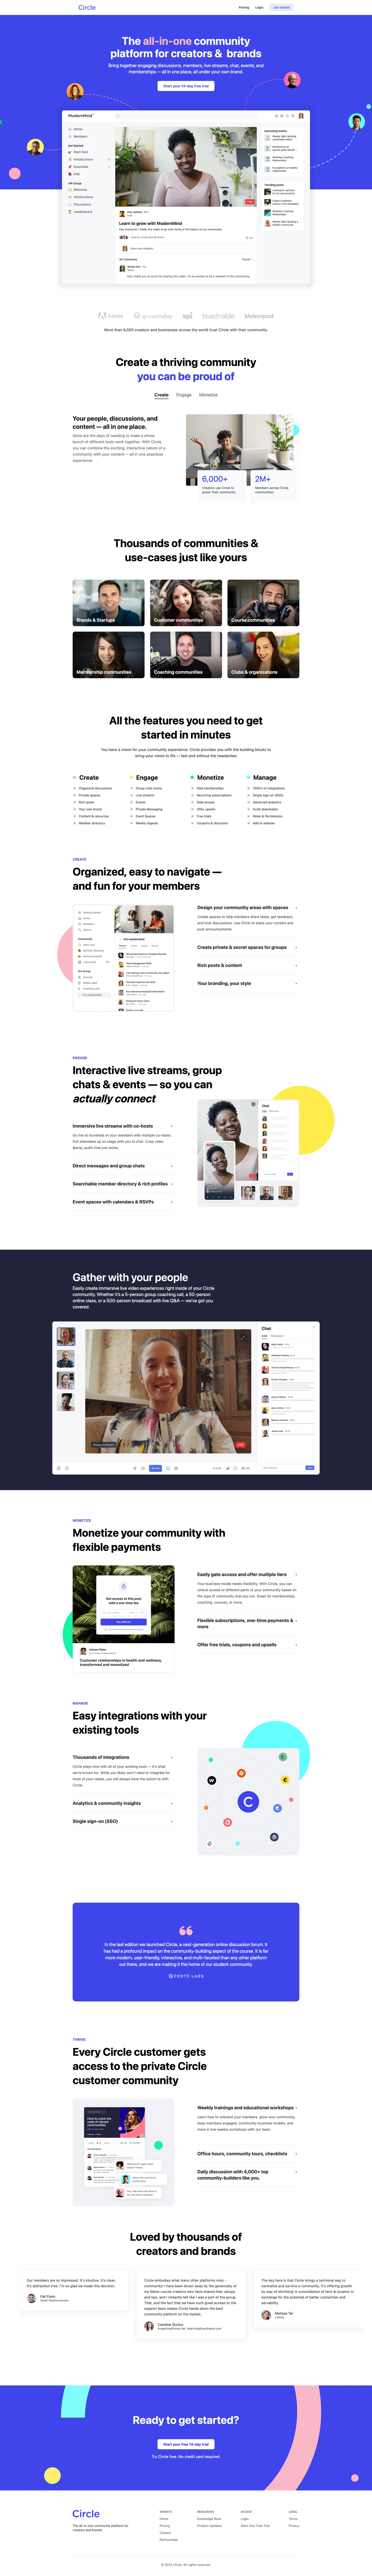 Circle Landing Page Example: The all-in-one community platform for creators & brands. Bring together engaging discussions, members, live streams, chat, events, and memberships — all in one place, all under your own brand.